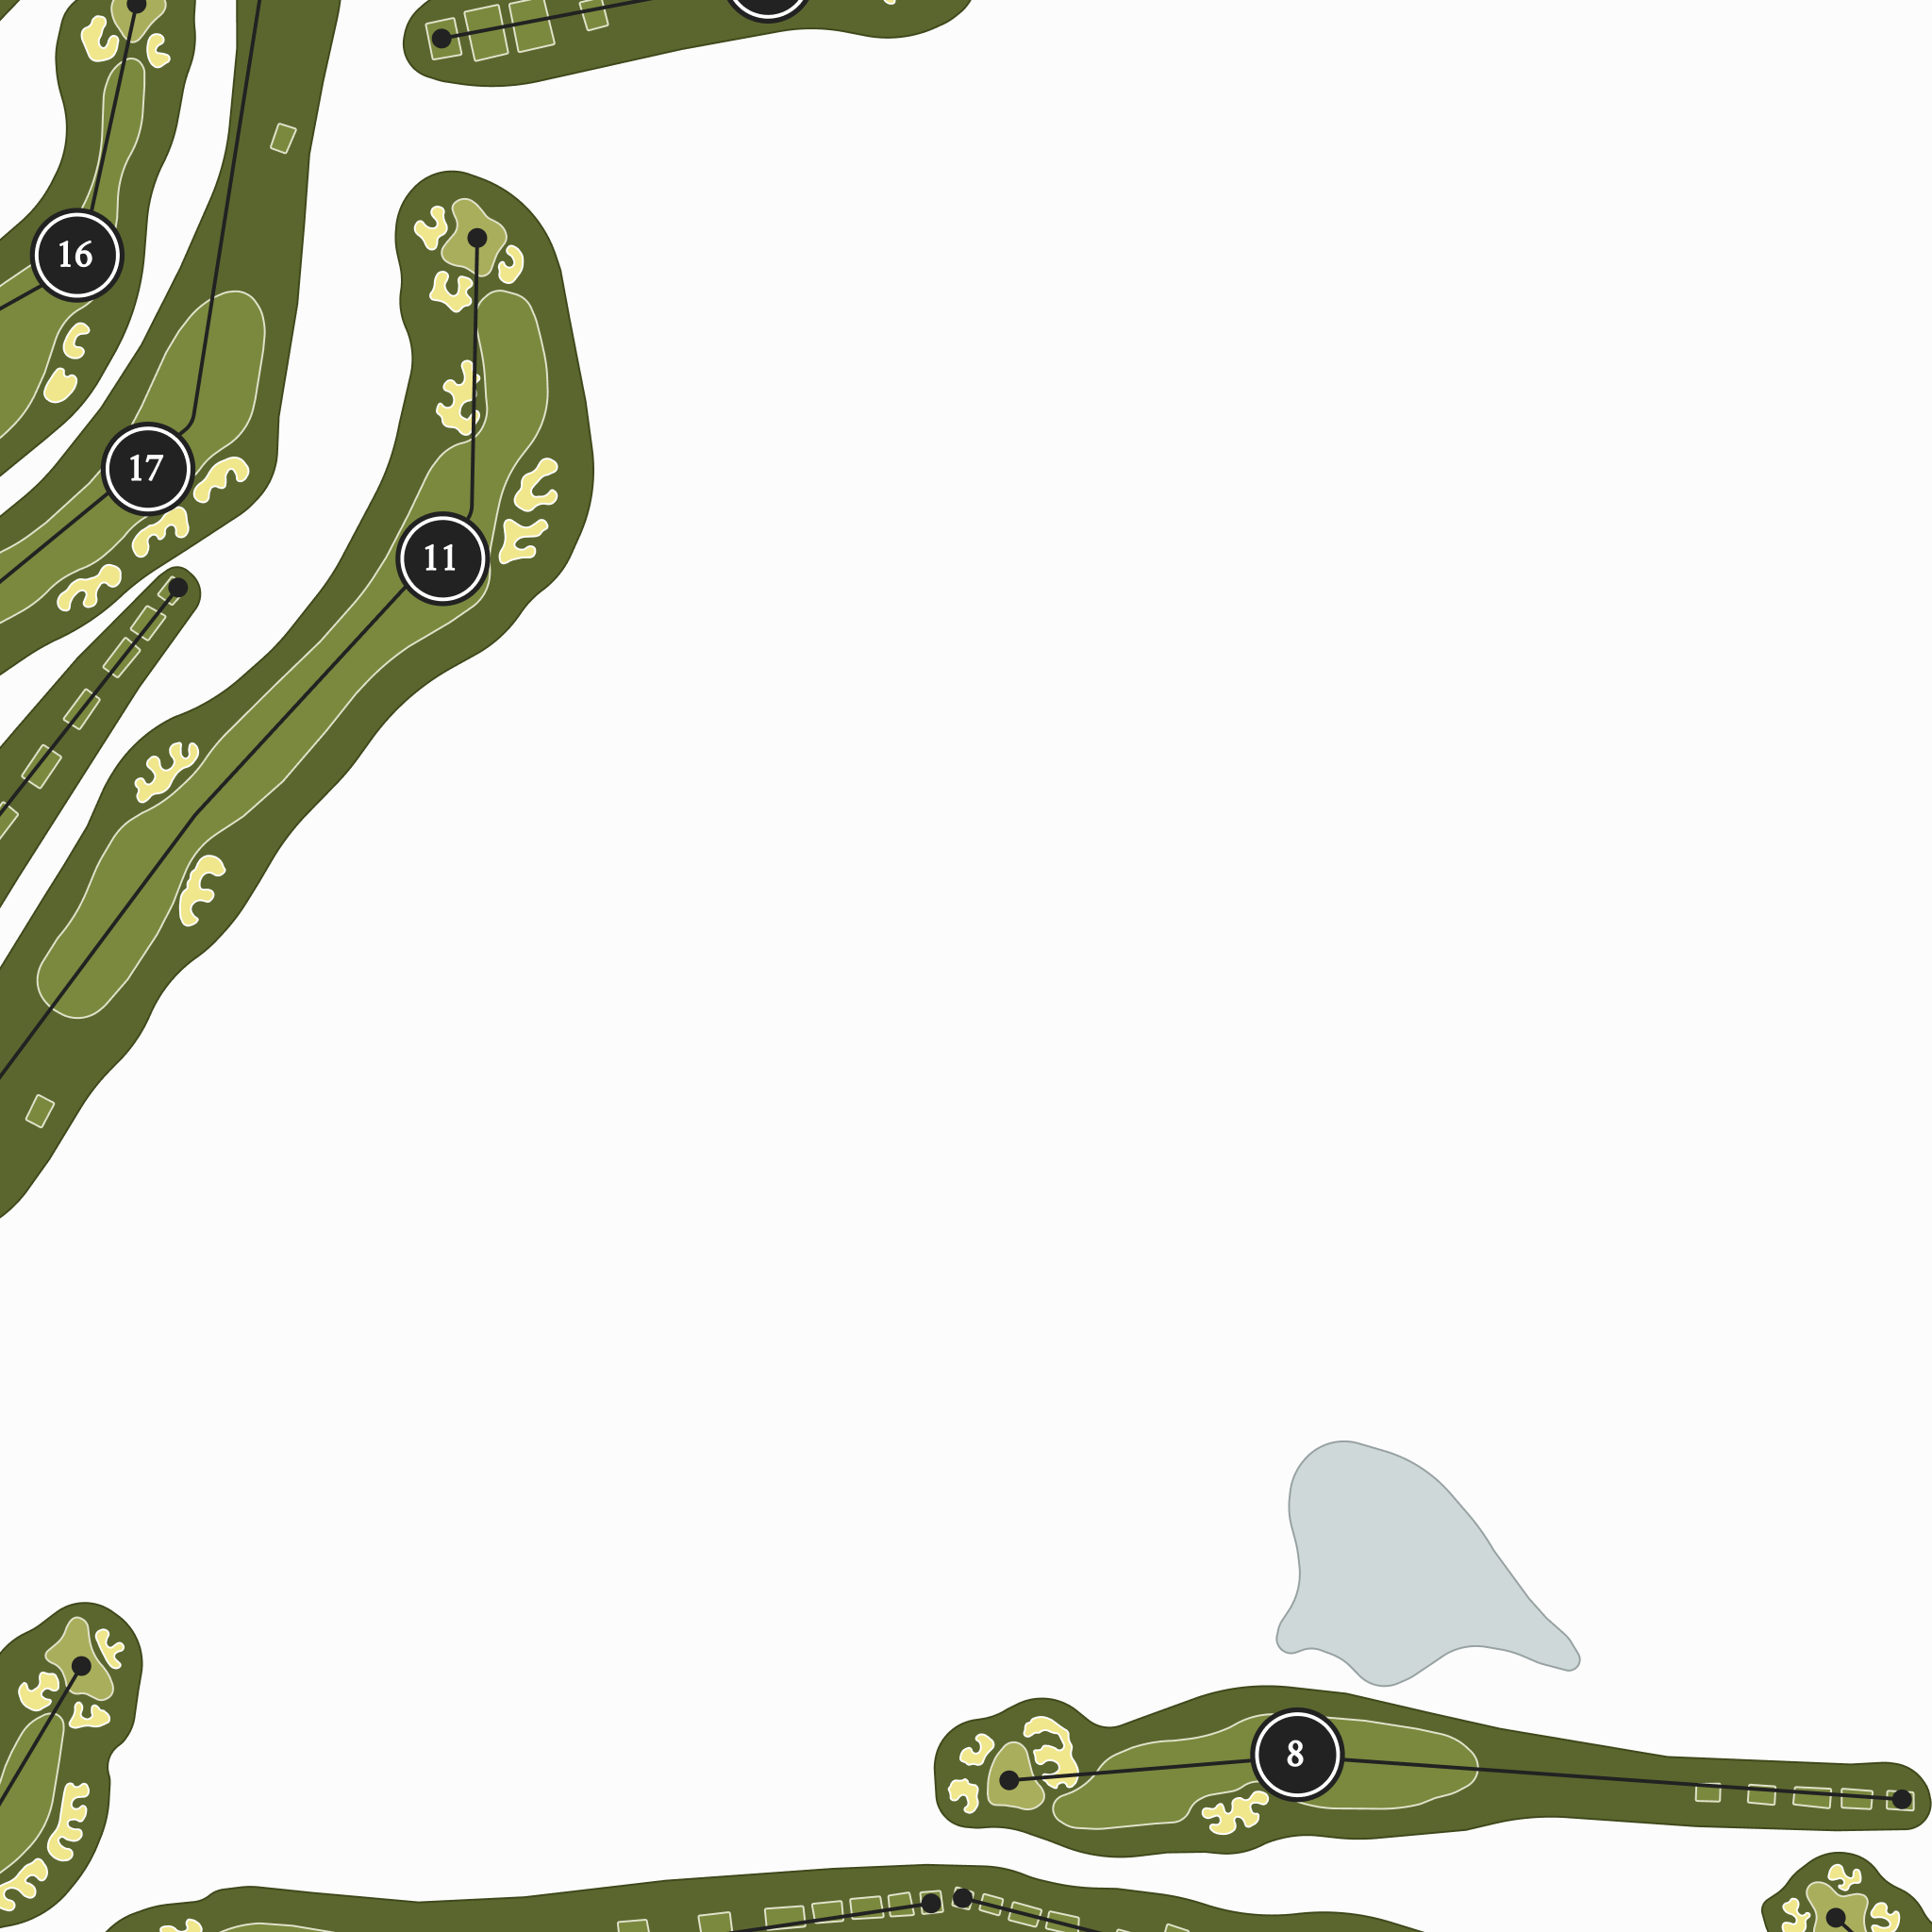 Cog Hill Golf & Country Club - Course No 4 - Dubsdread | Golf Course Map | Close Up